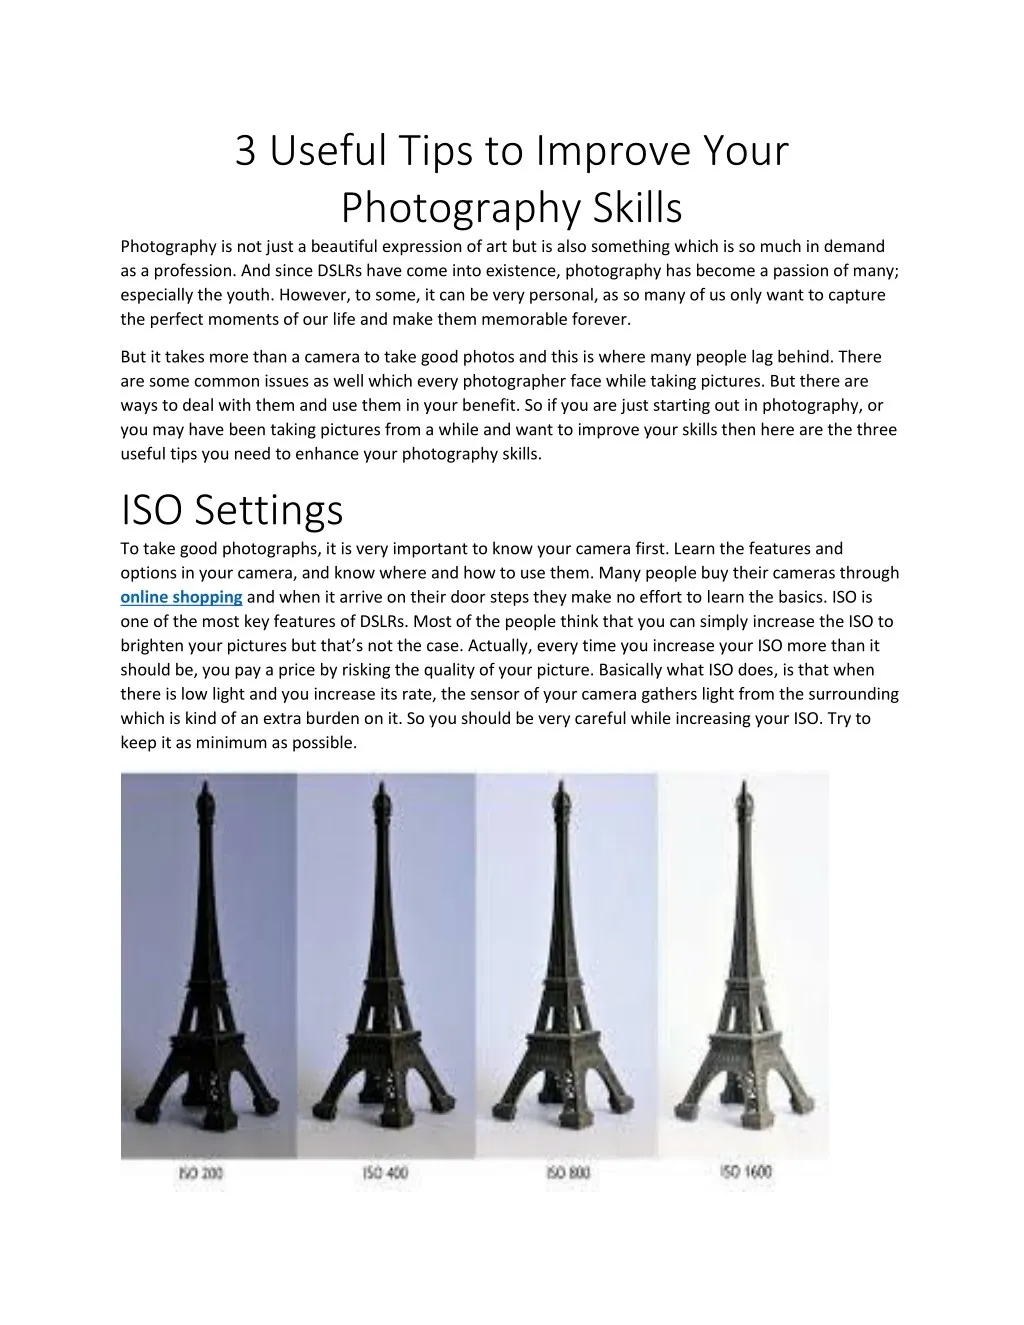 3 useful tips to improve your photography skills